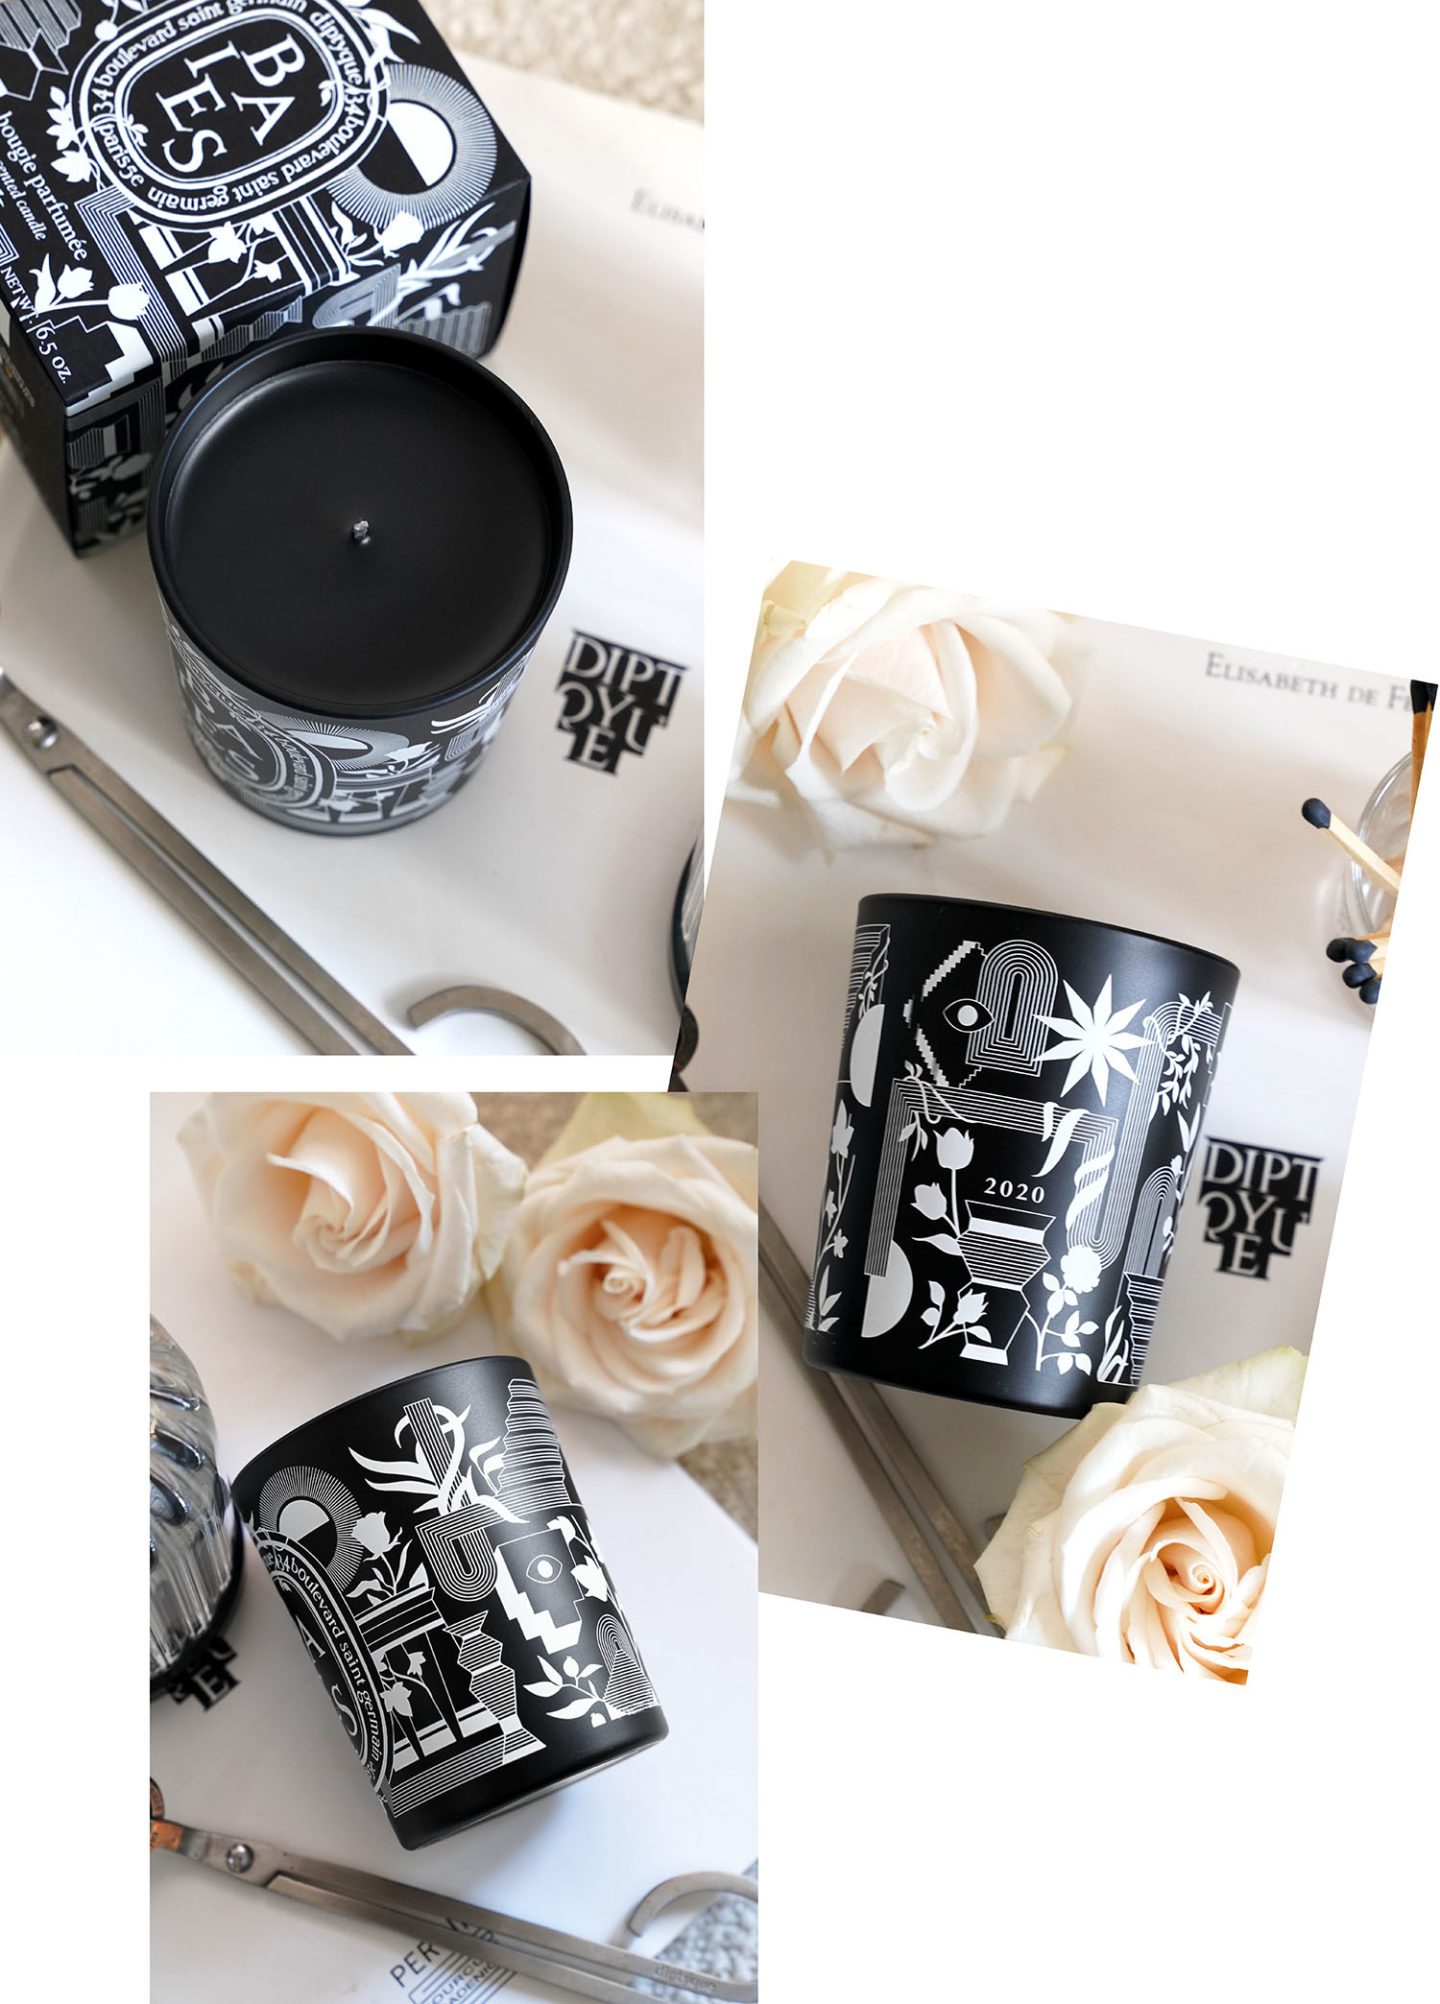 Diptyque Black Friday Baies Candle 2020 | The Beauty Lookbook